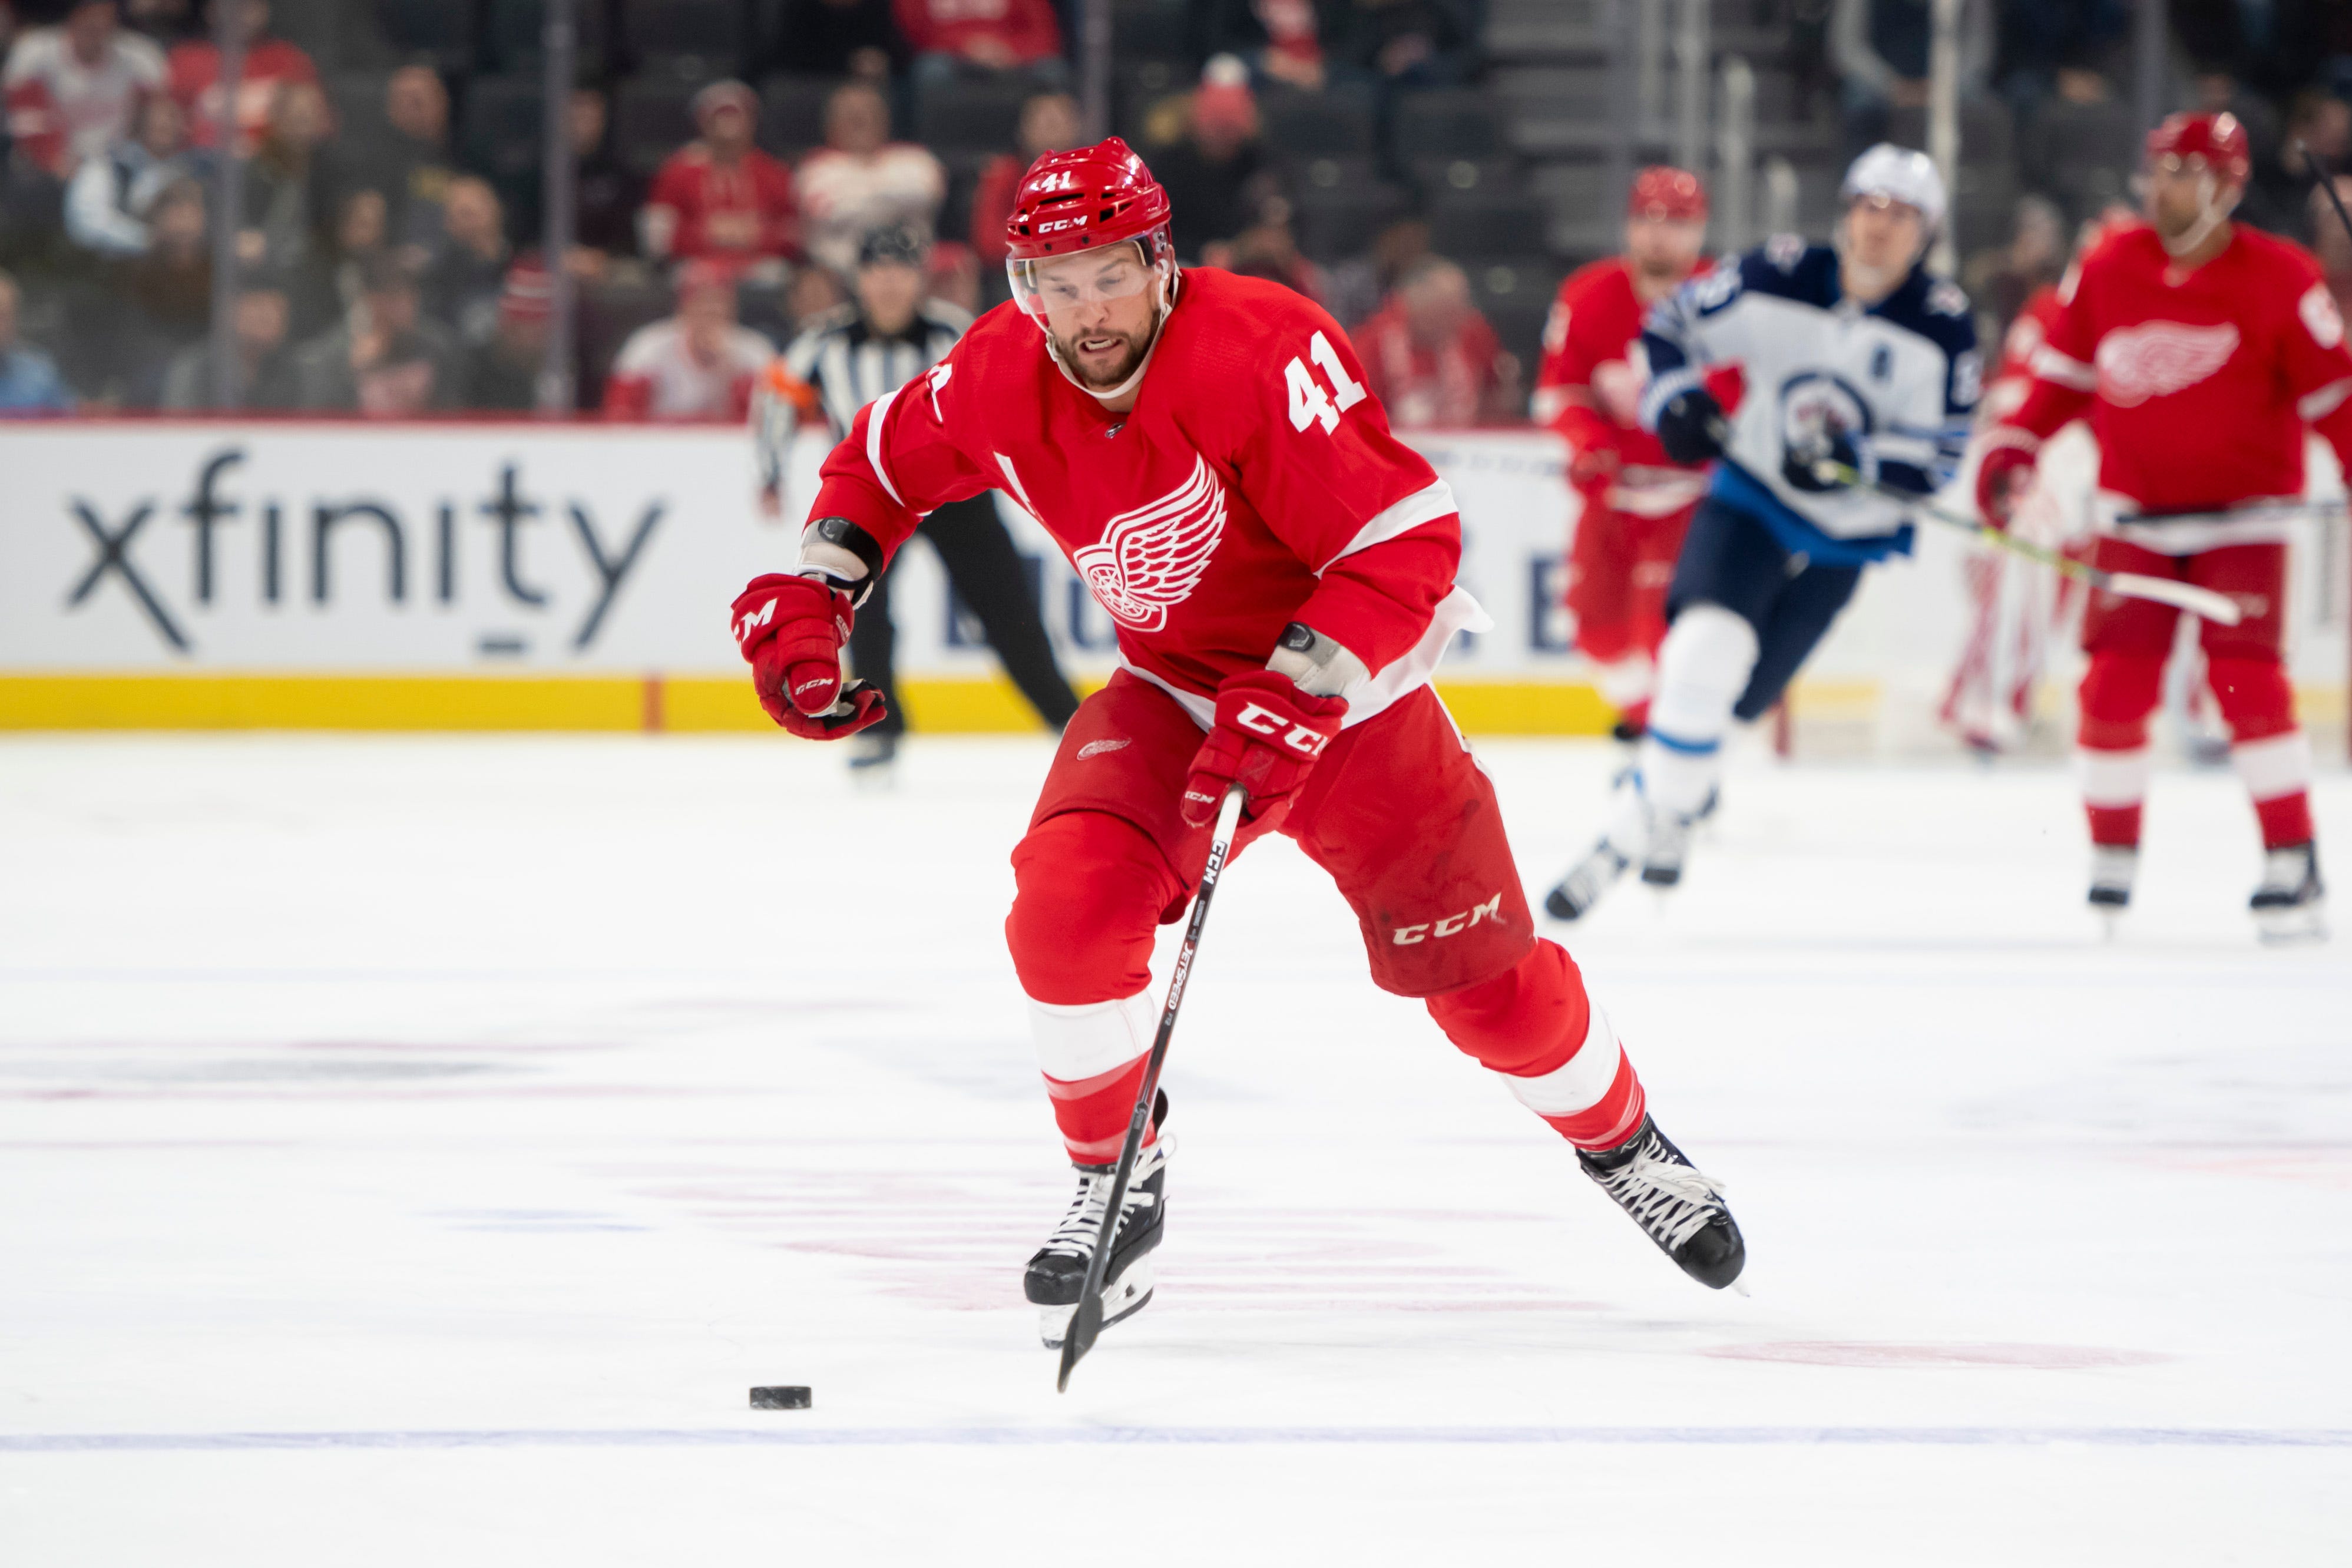 Luke Glendening – AGE: 31: CONTRACT: Ends 2021, $1.8 million per: STATS: 60 games, 6 goals, 3 assists. COMMENT: Grew into a leadership role, and Glendening was impressive doing it. But on the ice, it was another sub-par season. This will be an interesting case for the Wings at the trade deadline, as Glendening has value around the NHL. GRADE: C-minus.